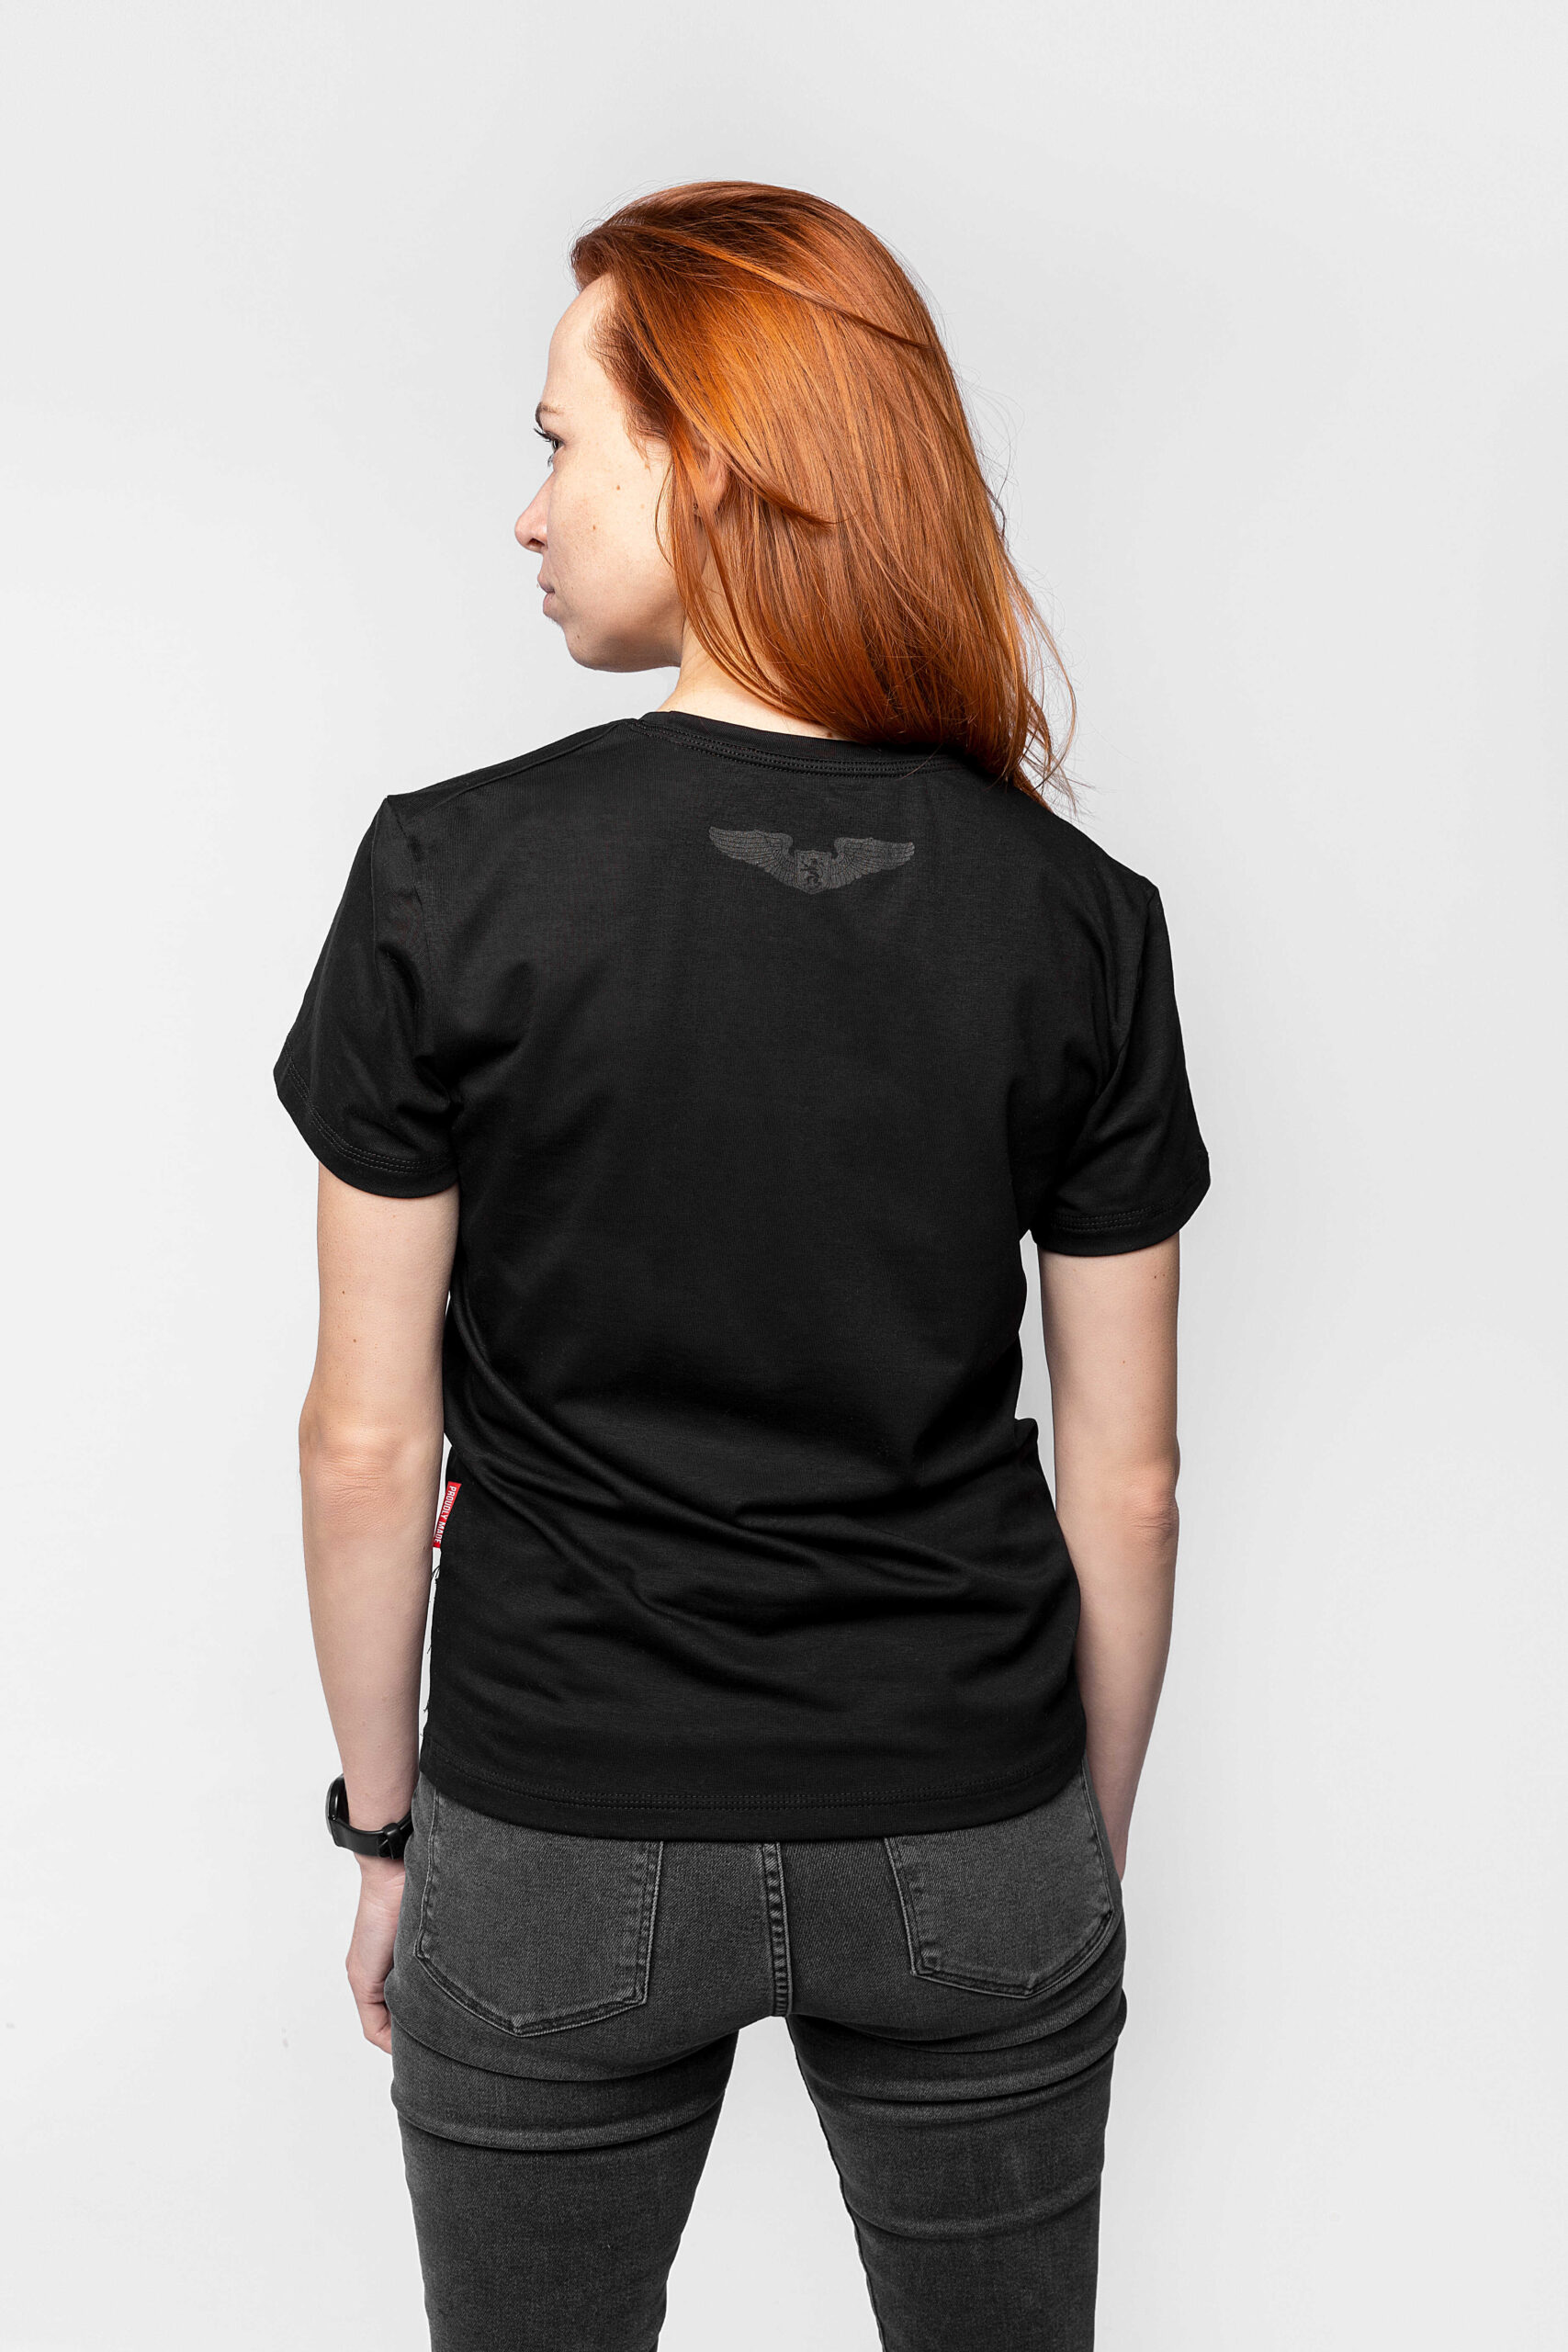 Women's T-Shirt Exiled From Hell. Color black. 1.